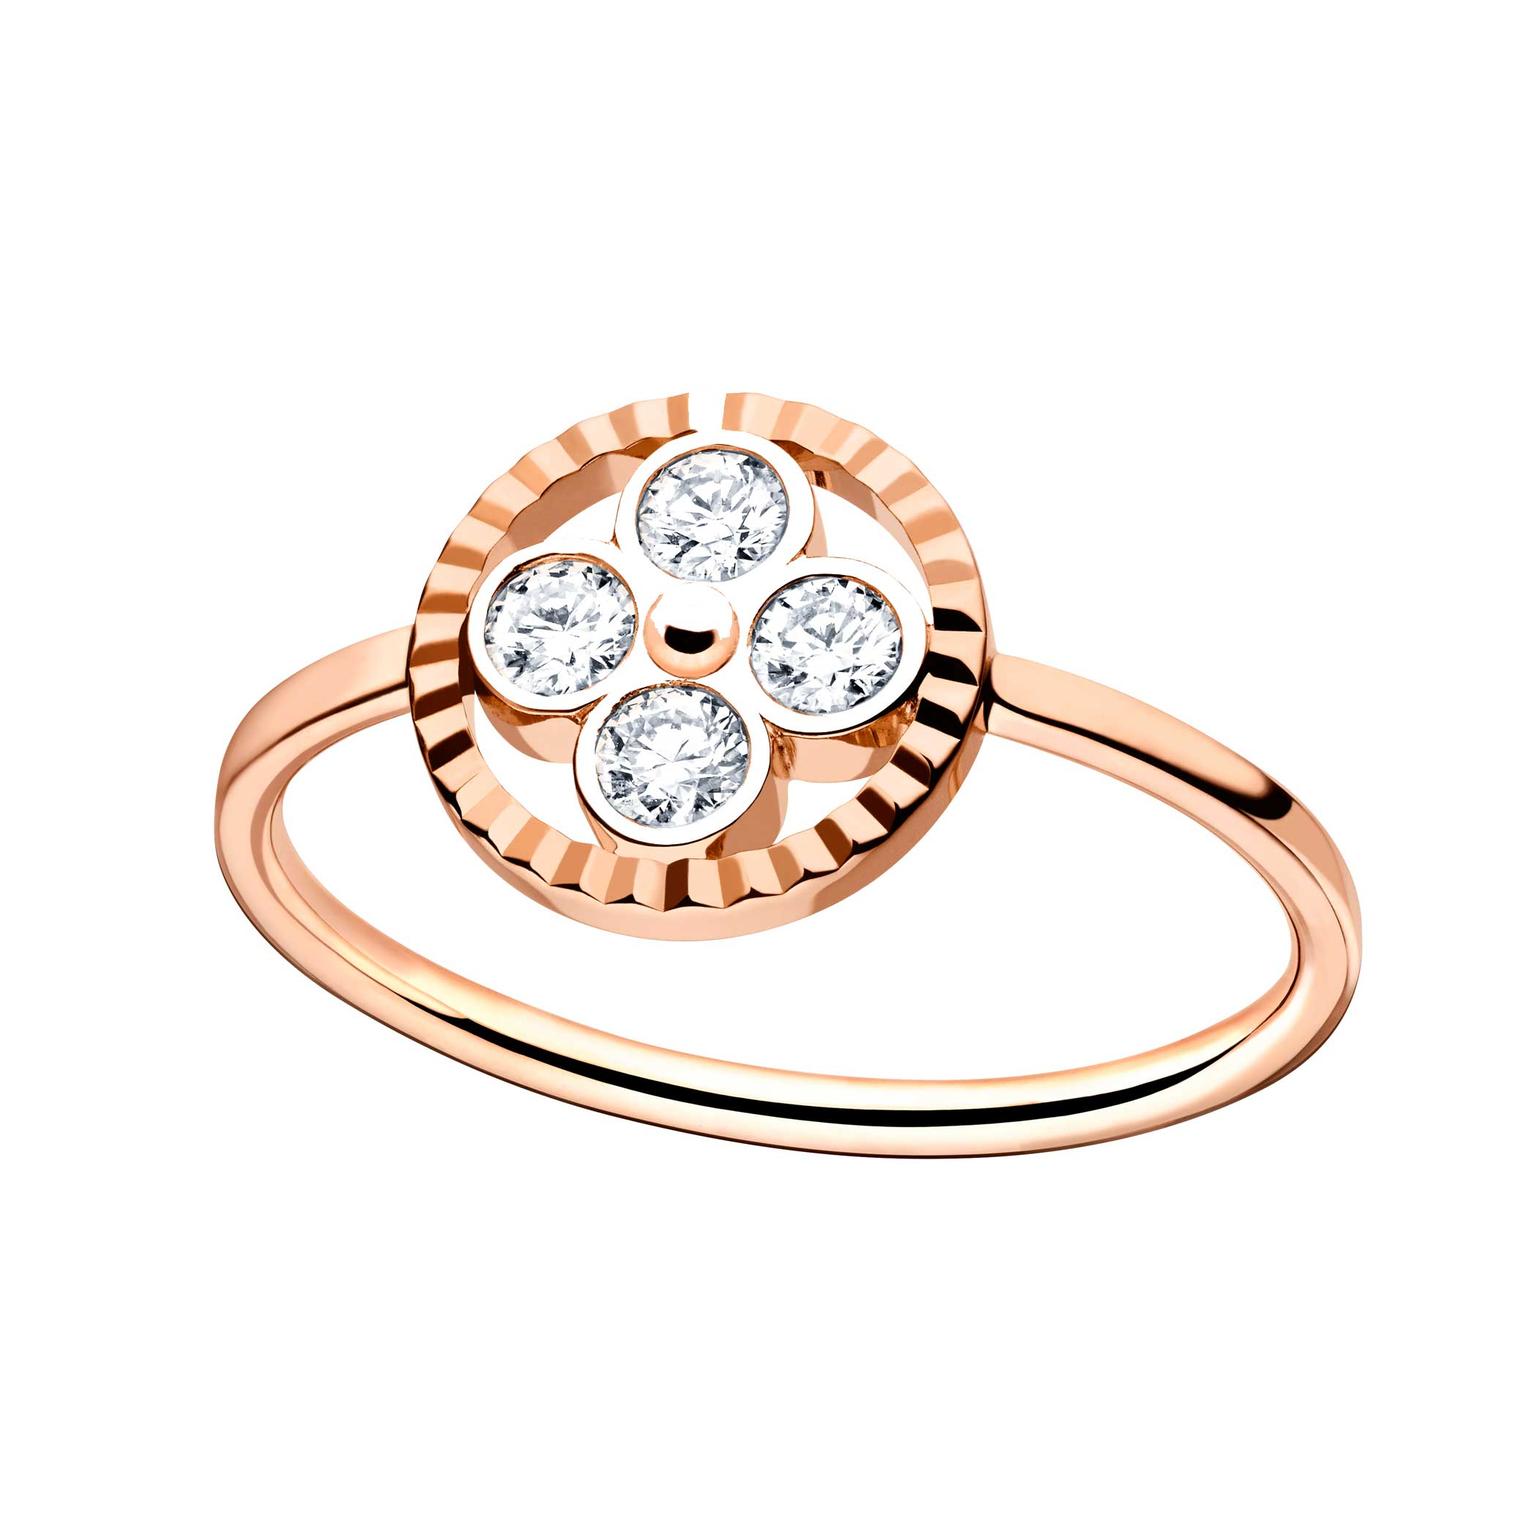 Shop Louis Vuitton Star Blossom Ring In Pink Gold And Diamonds by